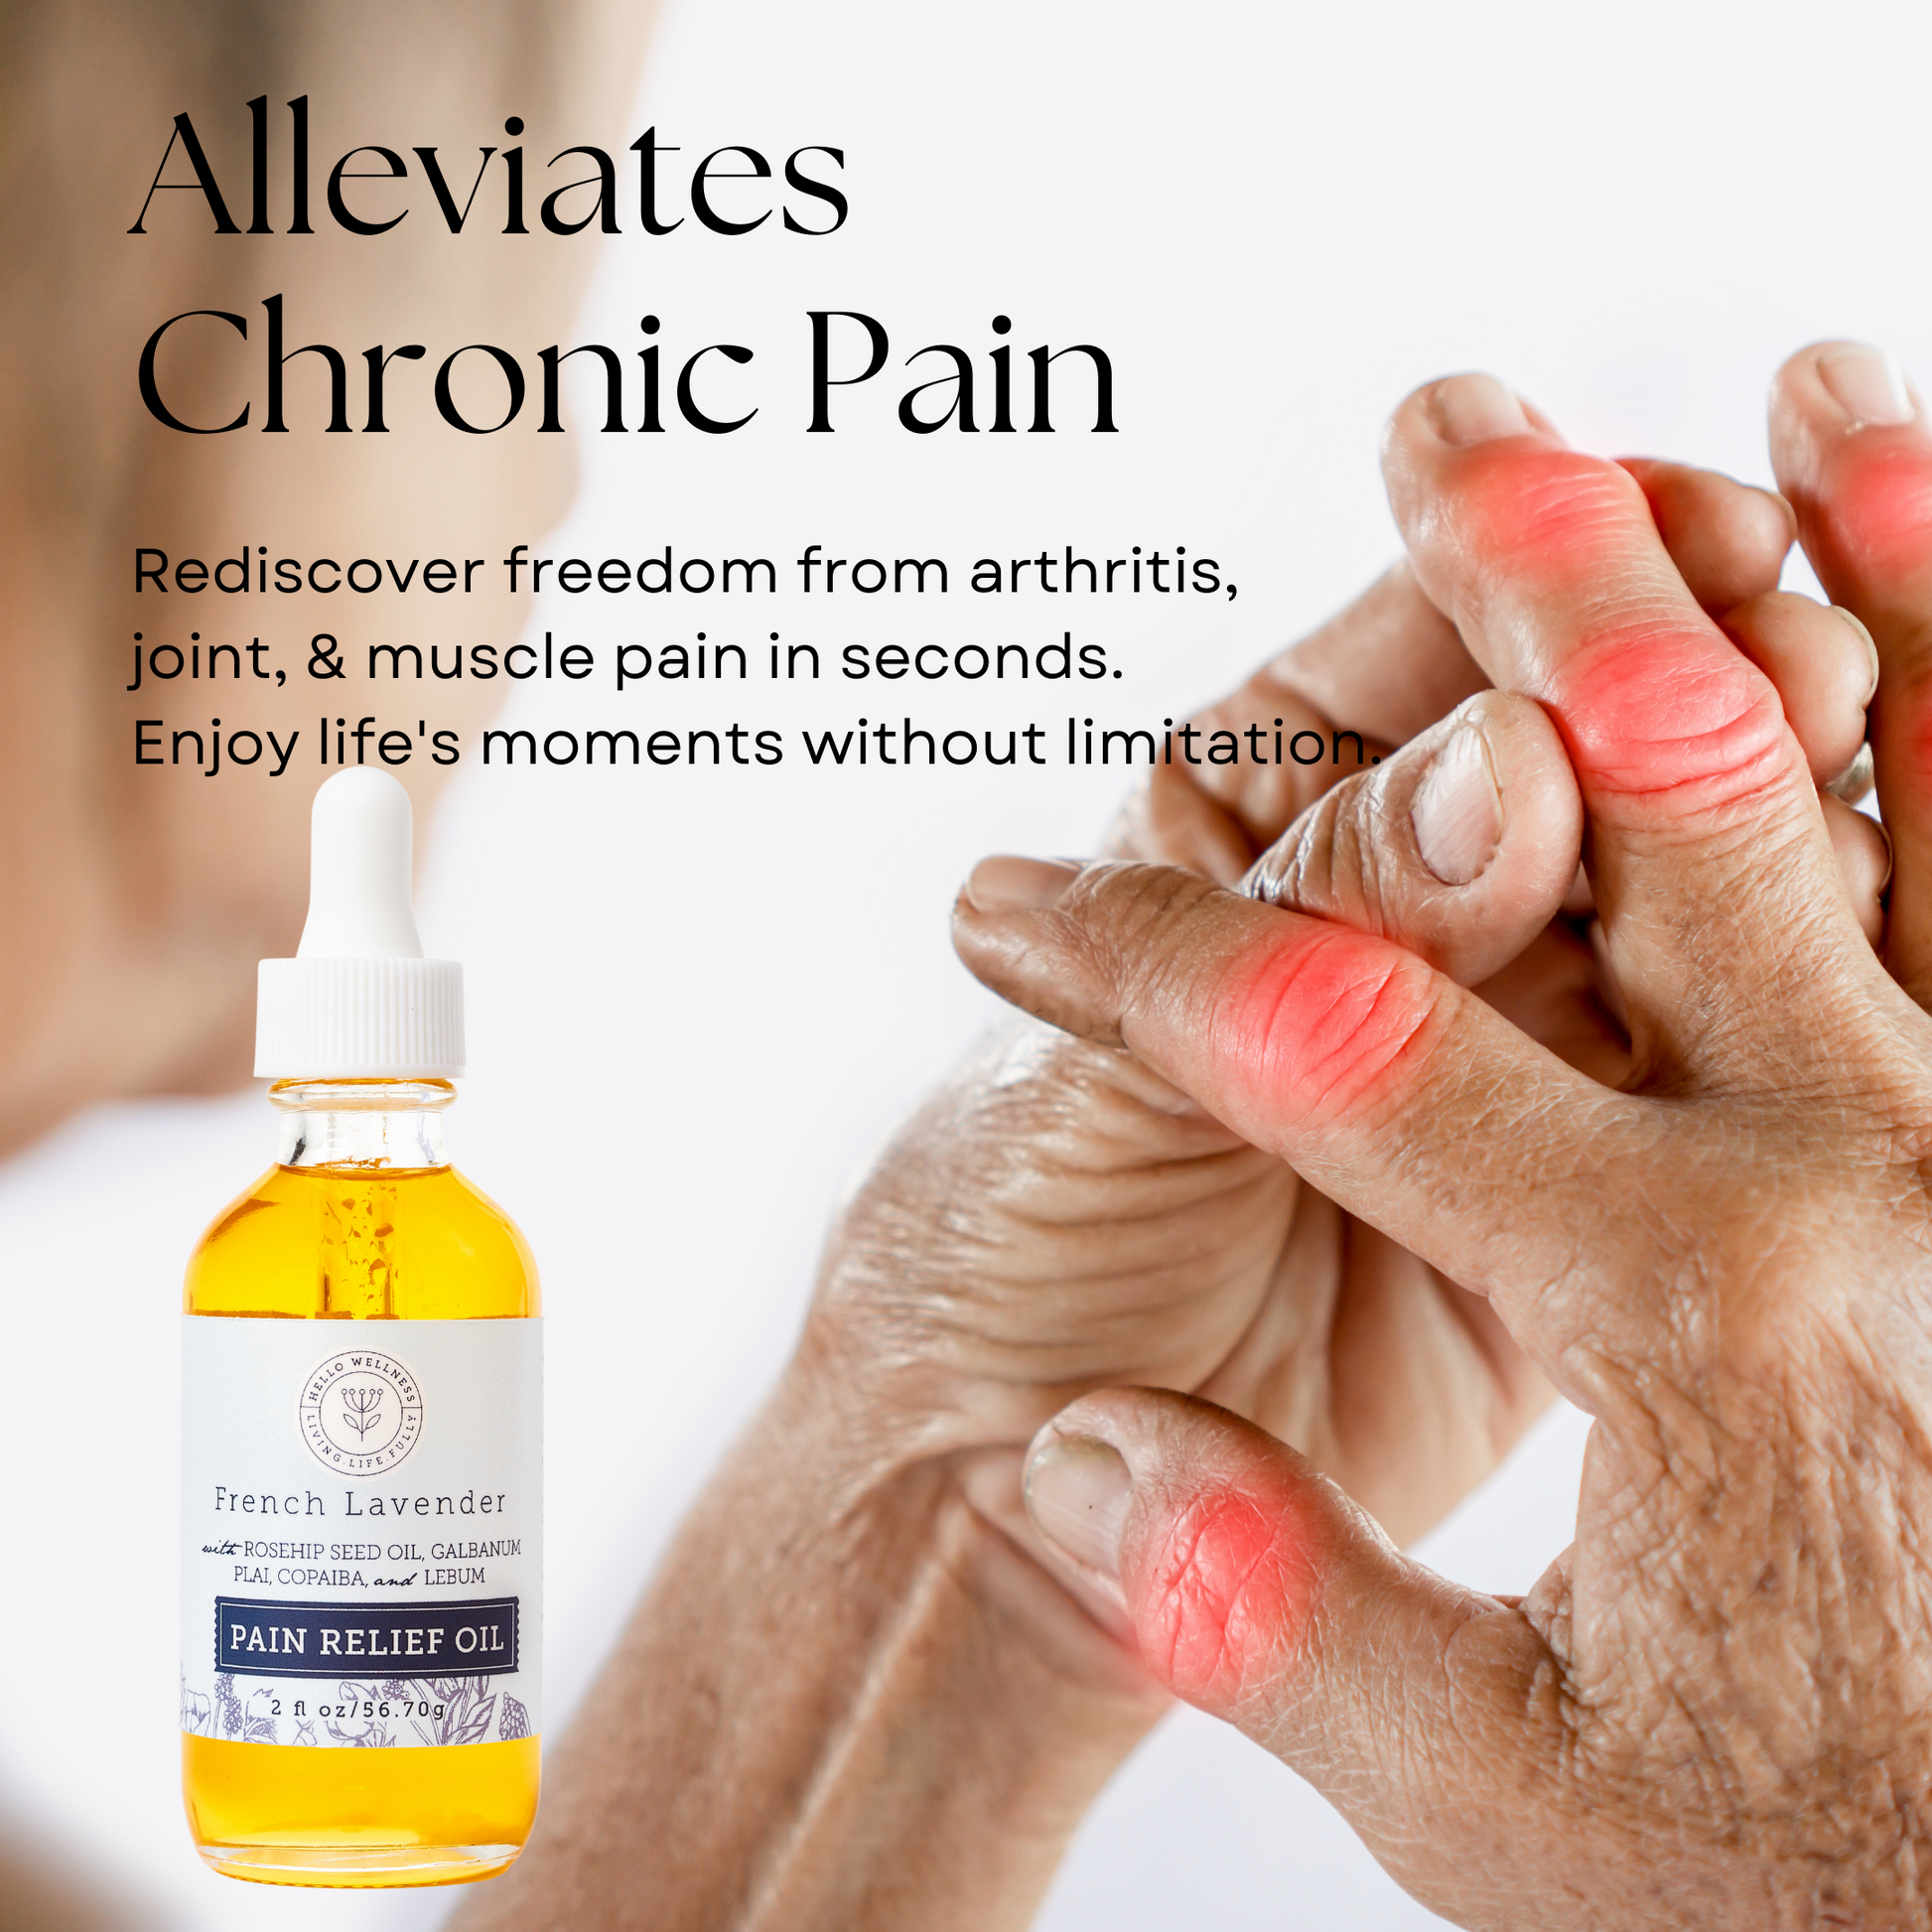 Alleviates Chronic Pain: Rediscover freedom from arthritis, joint, & muscle pain in seconds. Enjoy life's moments without limitation.